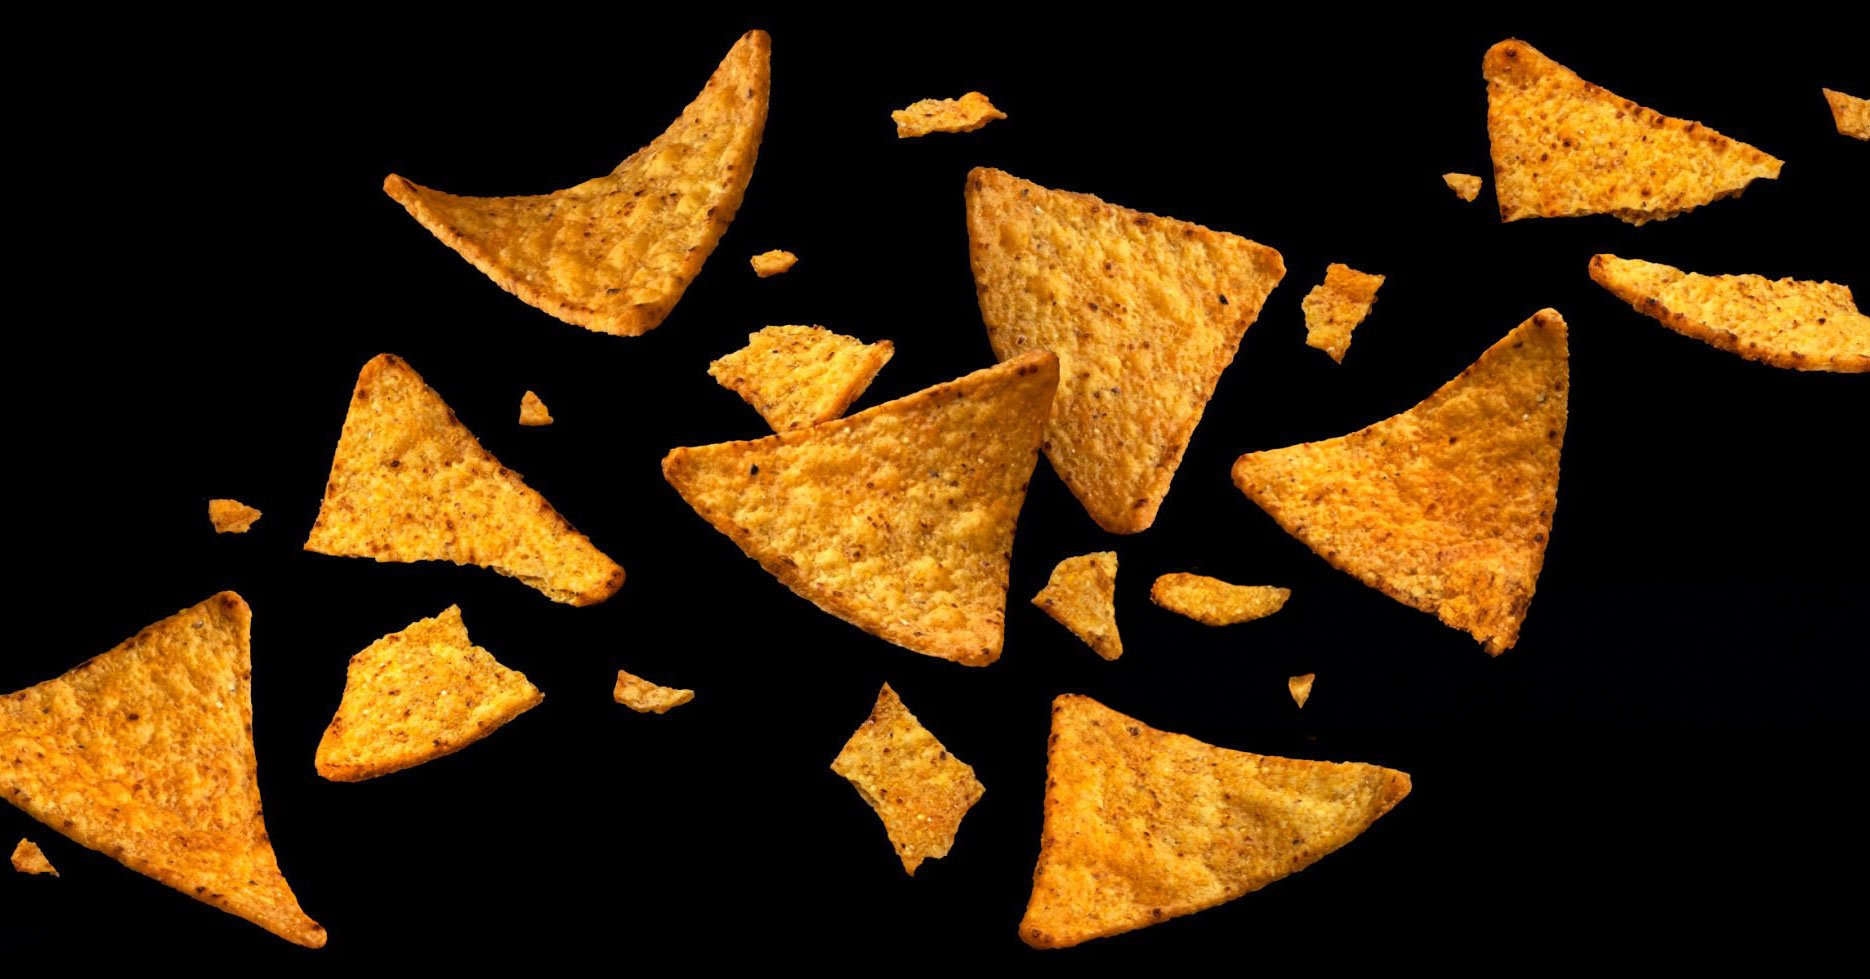 Triangle chips with red seasoning float down on black background